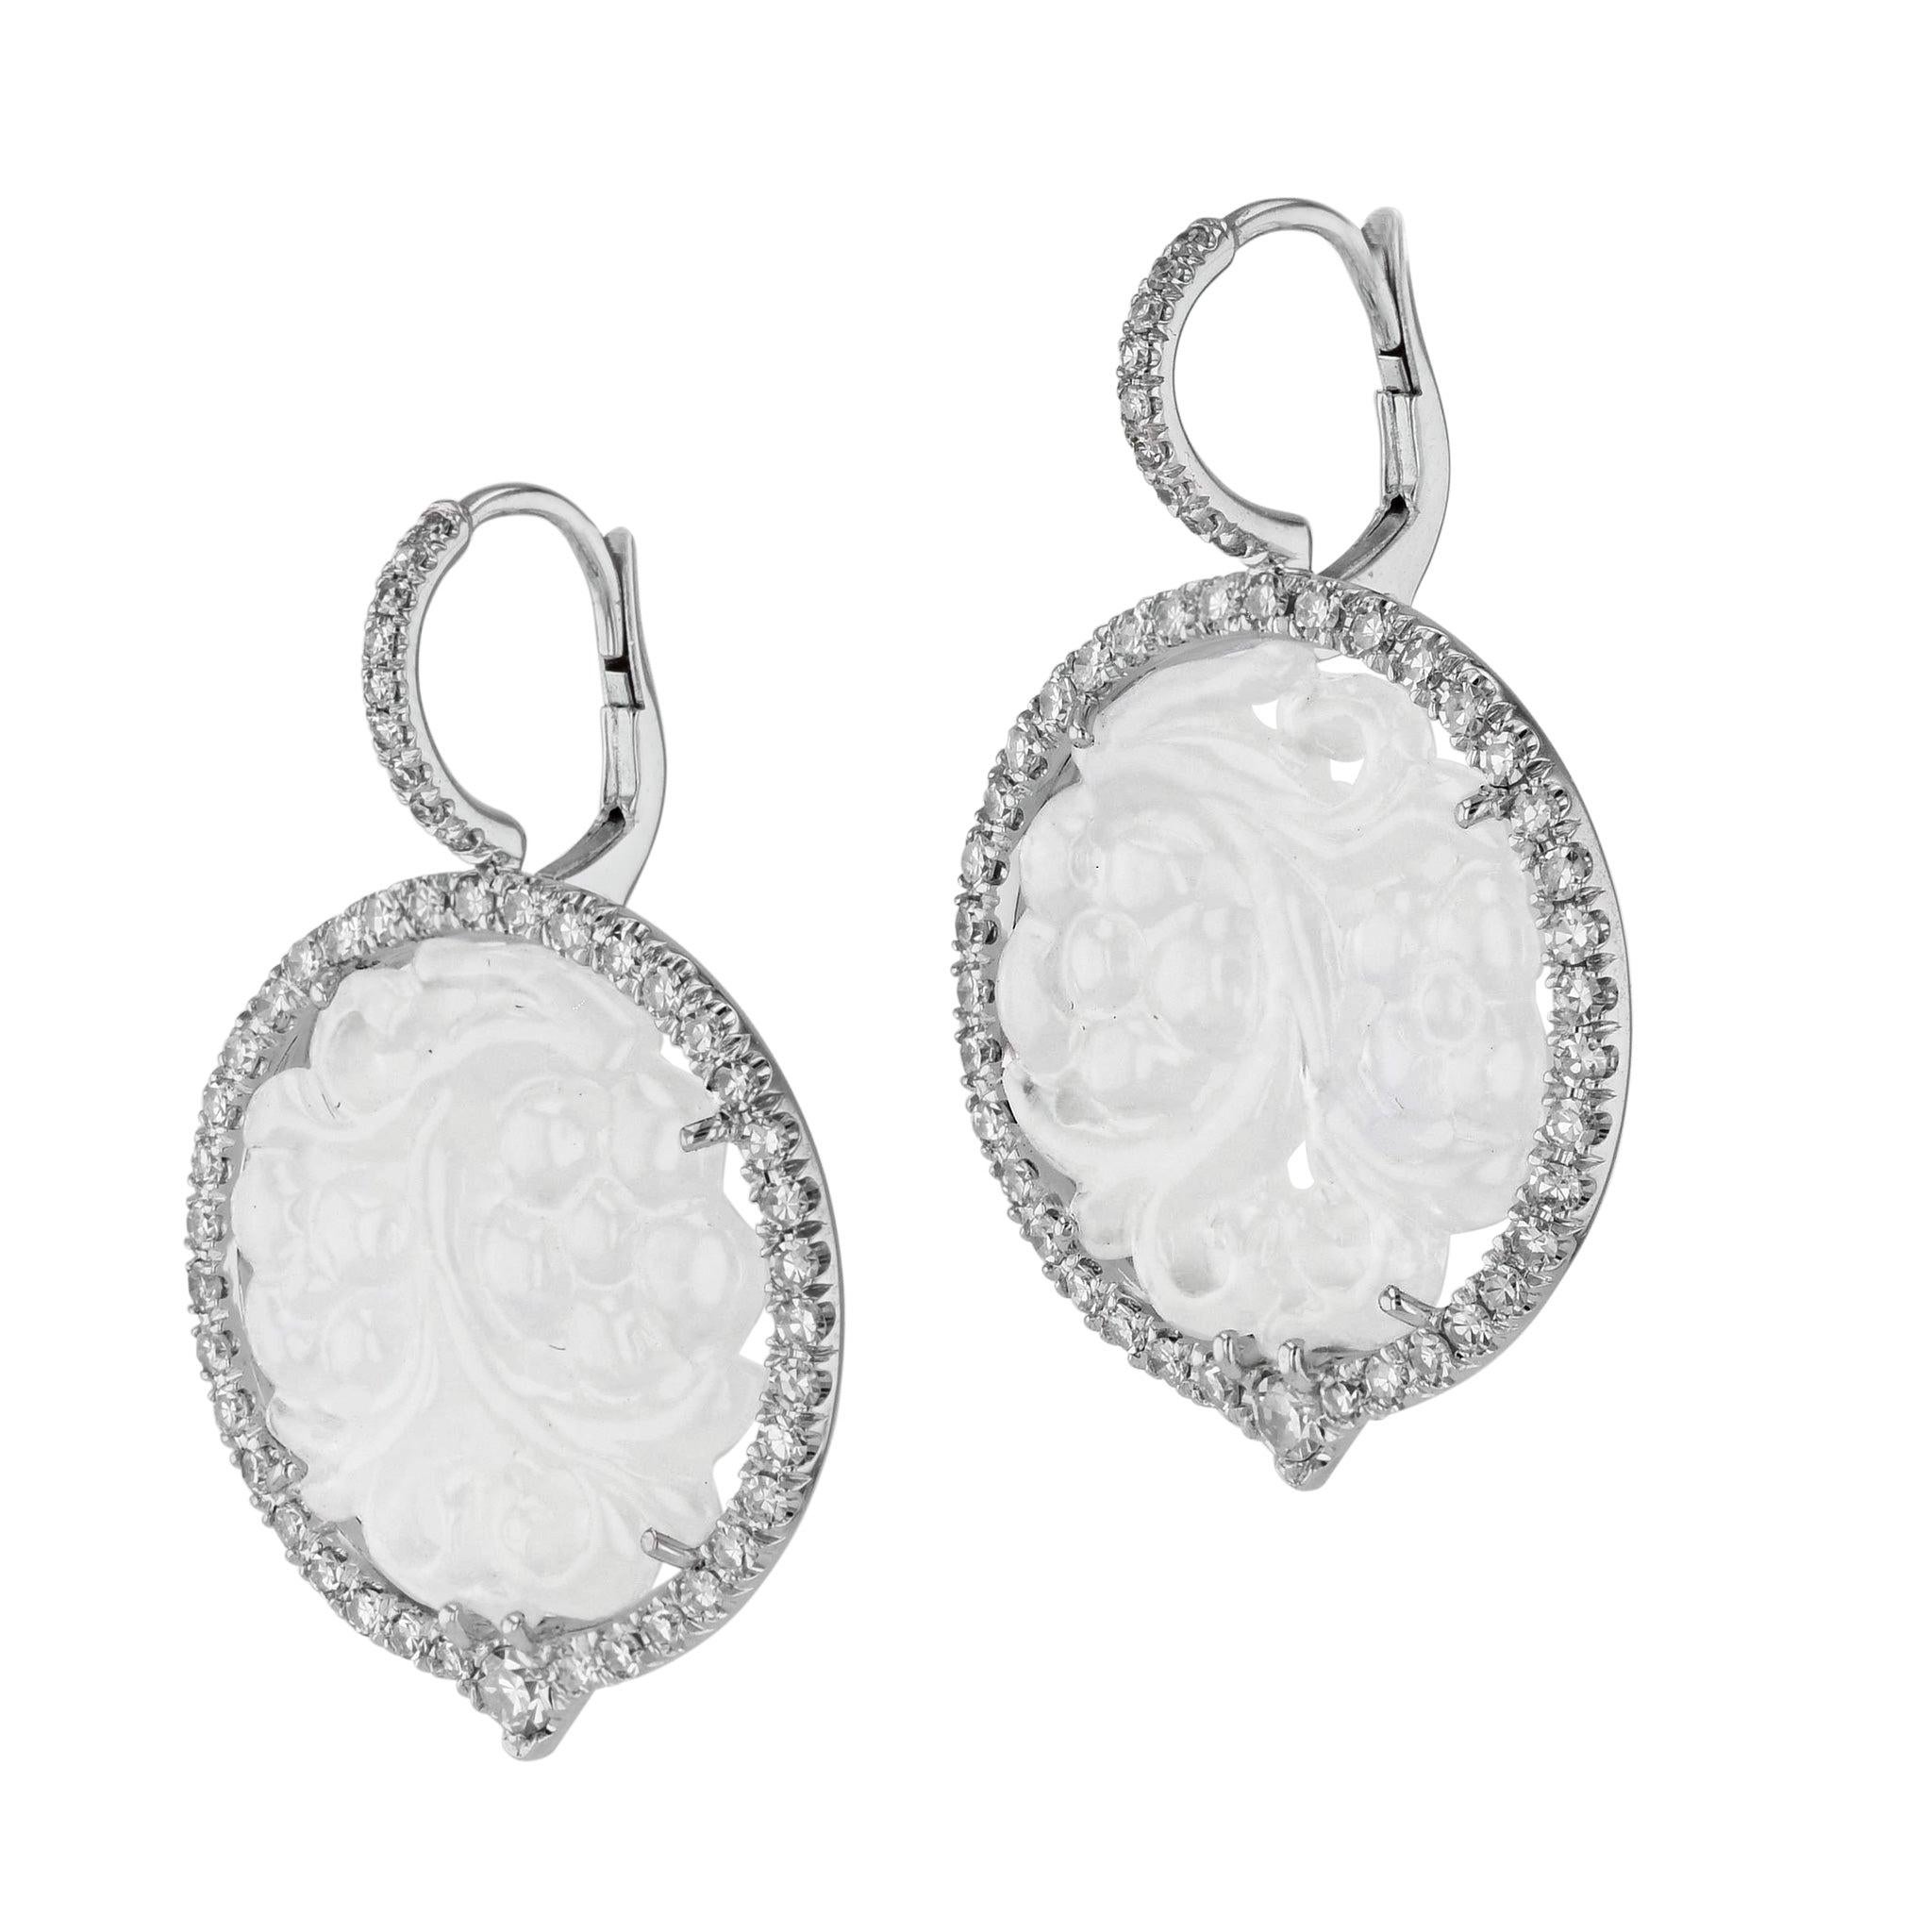 Stunning Icy Jadeite and Diamond Drop Earrings, crafted in luxurious 18kt White Gold, provide an elegant addition to any ensemble. Single Cut Diamonds  surround the 20mm Icy Jadeites and ascend gracefully up the bail.
These would make a spectacular